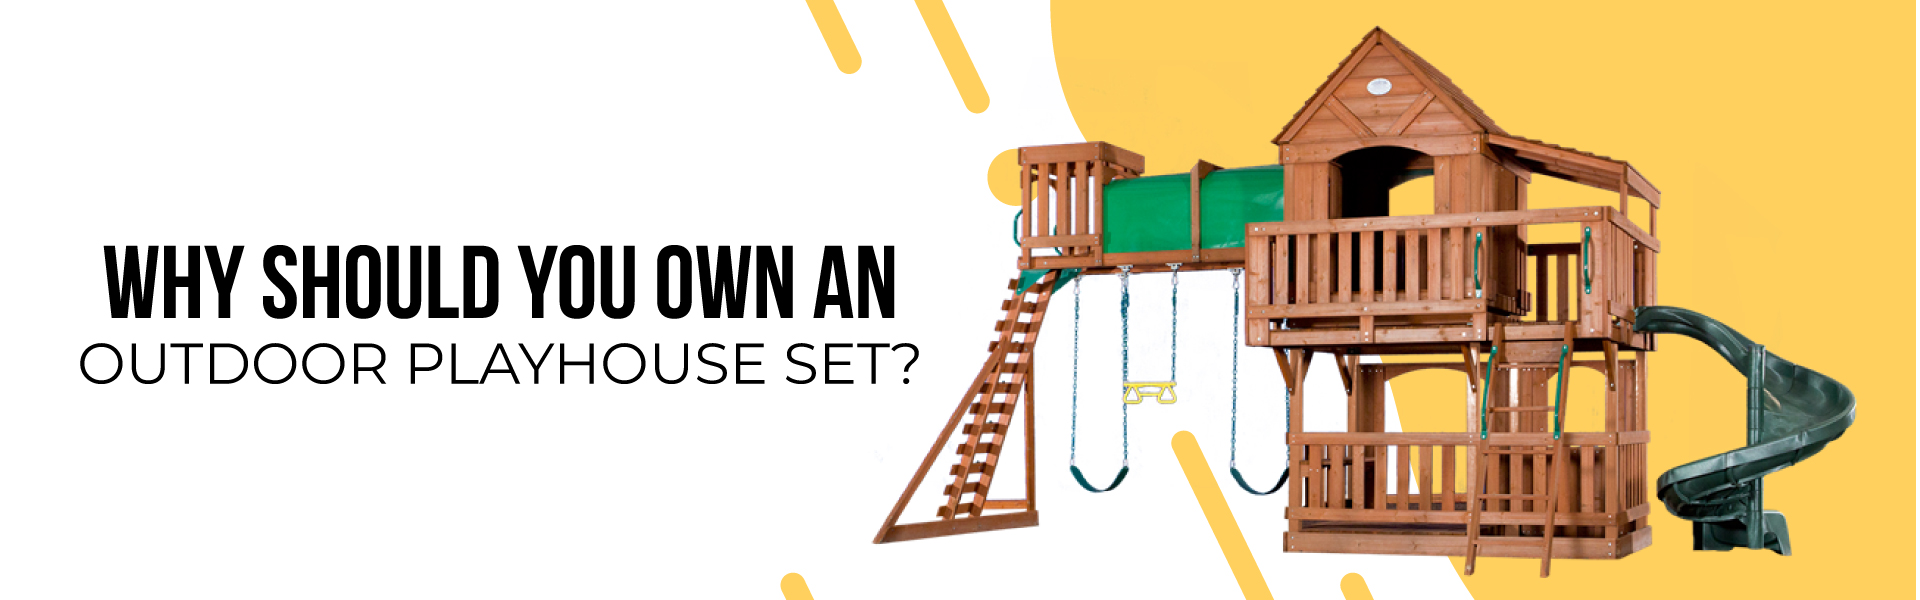 Why should you own an outdoor playhouse set